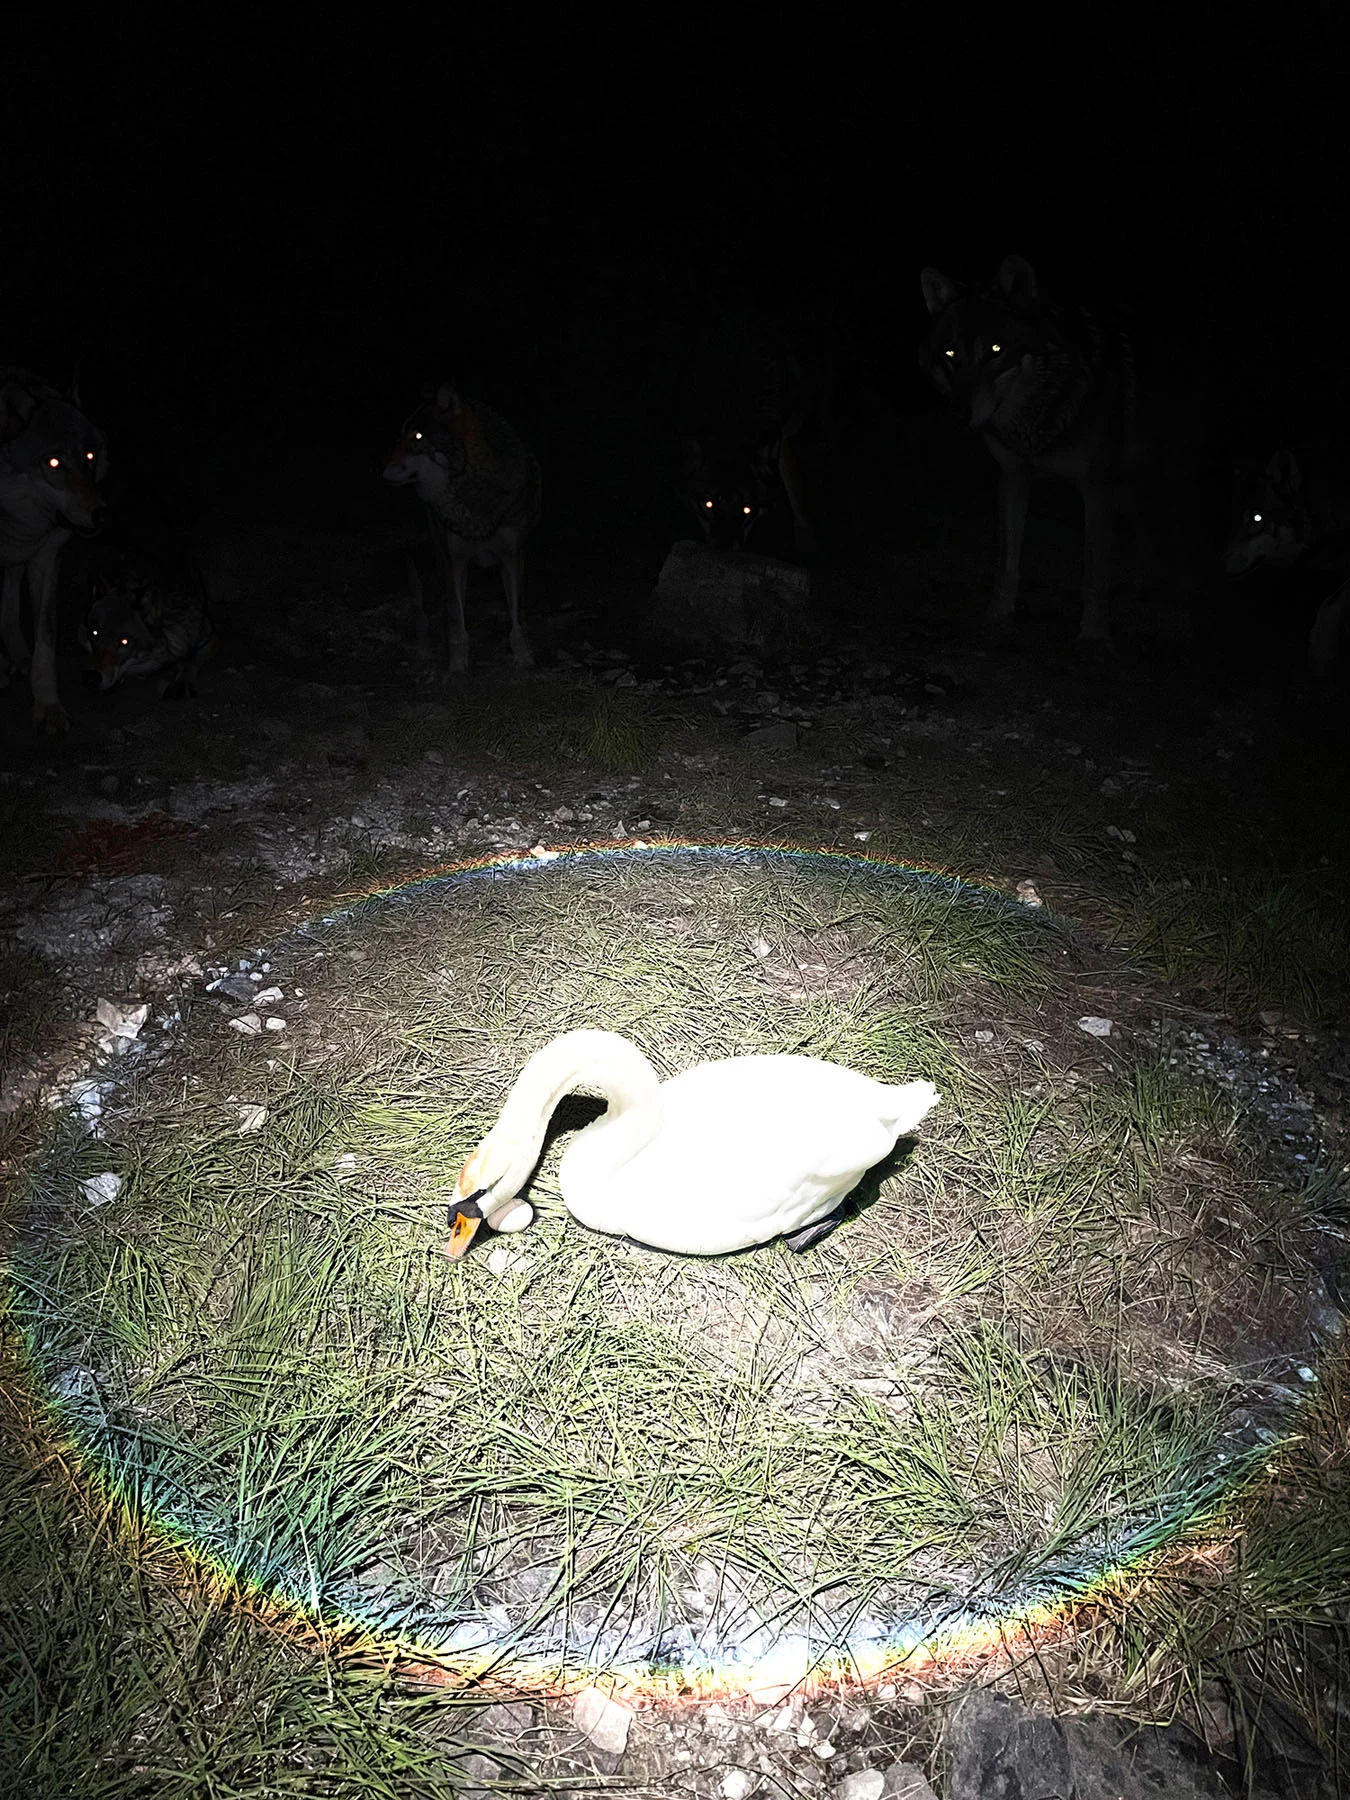 A night time photograph of a single swan caressing its egg under a singular flash light source. Around the swan is the refraction of a circular rainbow ring. In the background of the scene are the glowing eyes of several wolves in waiting.